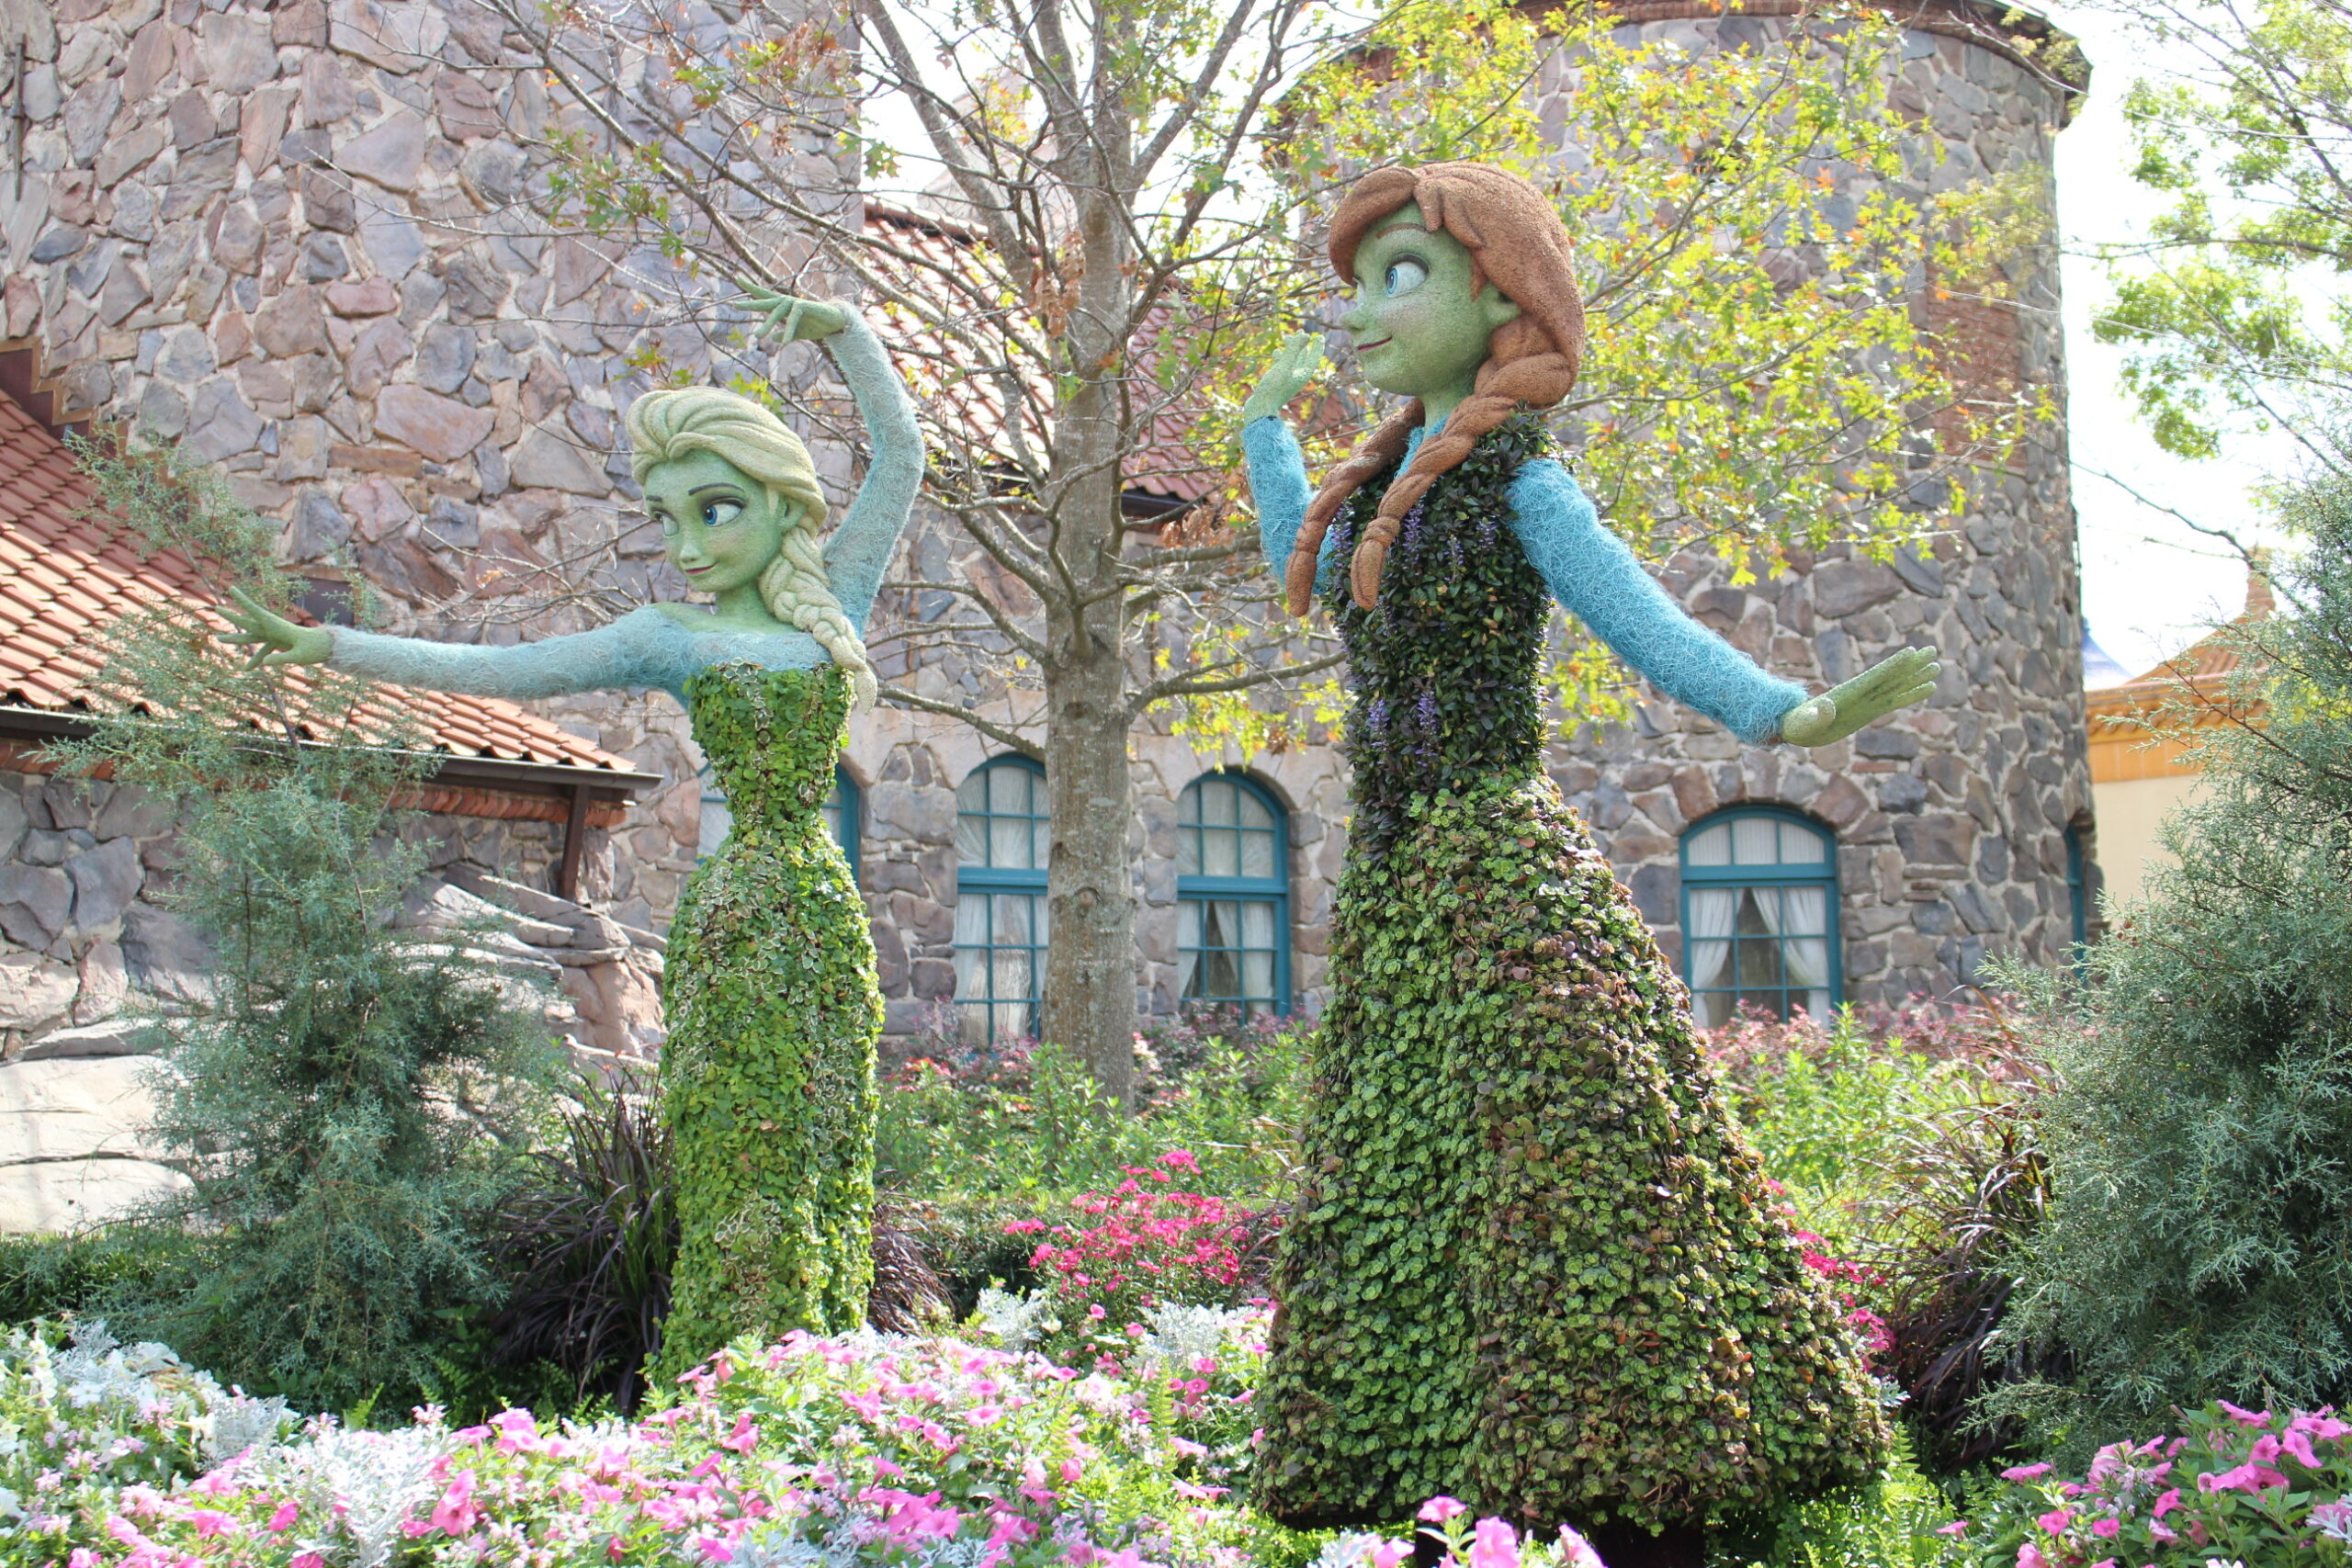 Epcot Flower and Garden Elsa and Anna From Frozen Topiaries in Green